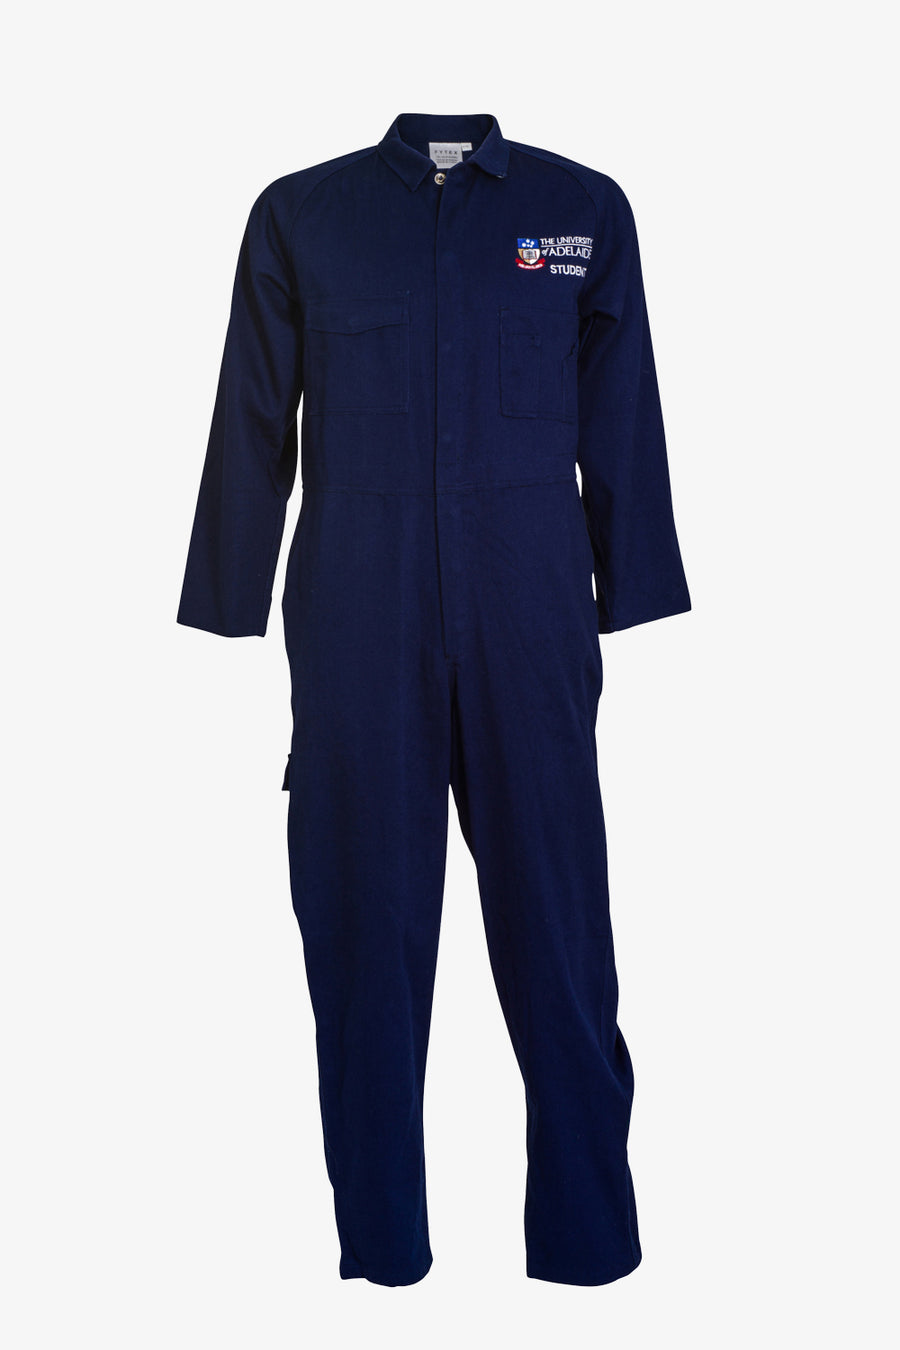 University Coverall - The Adelaide Store